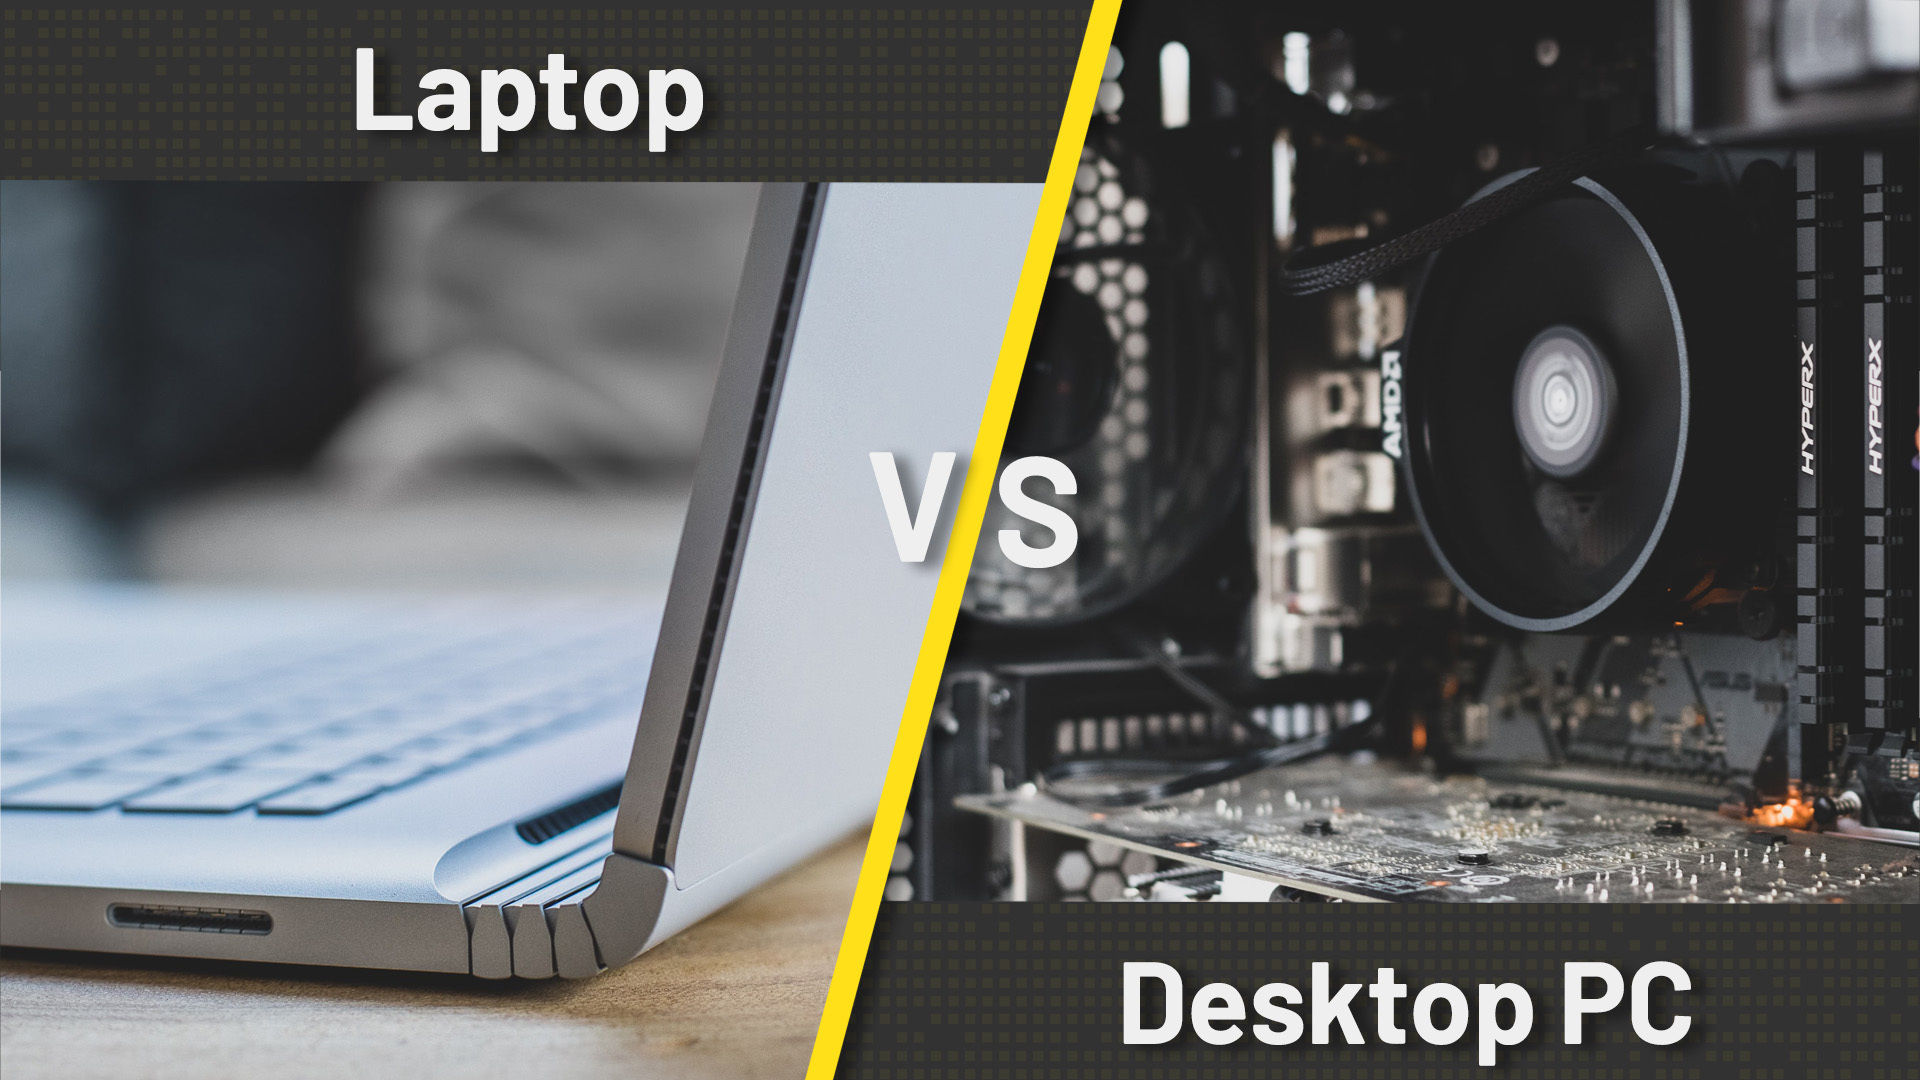 Netbook Vs Laptop What's The Difference